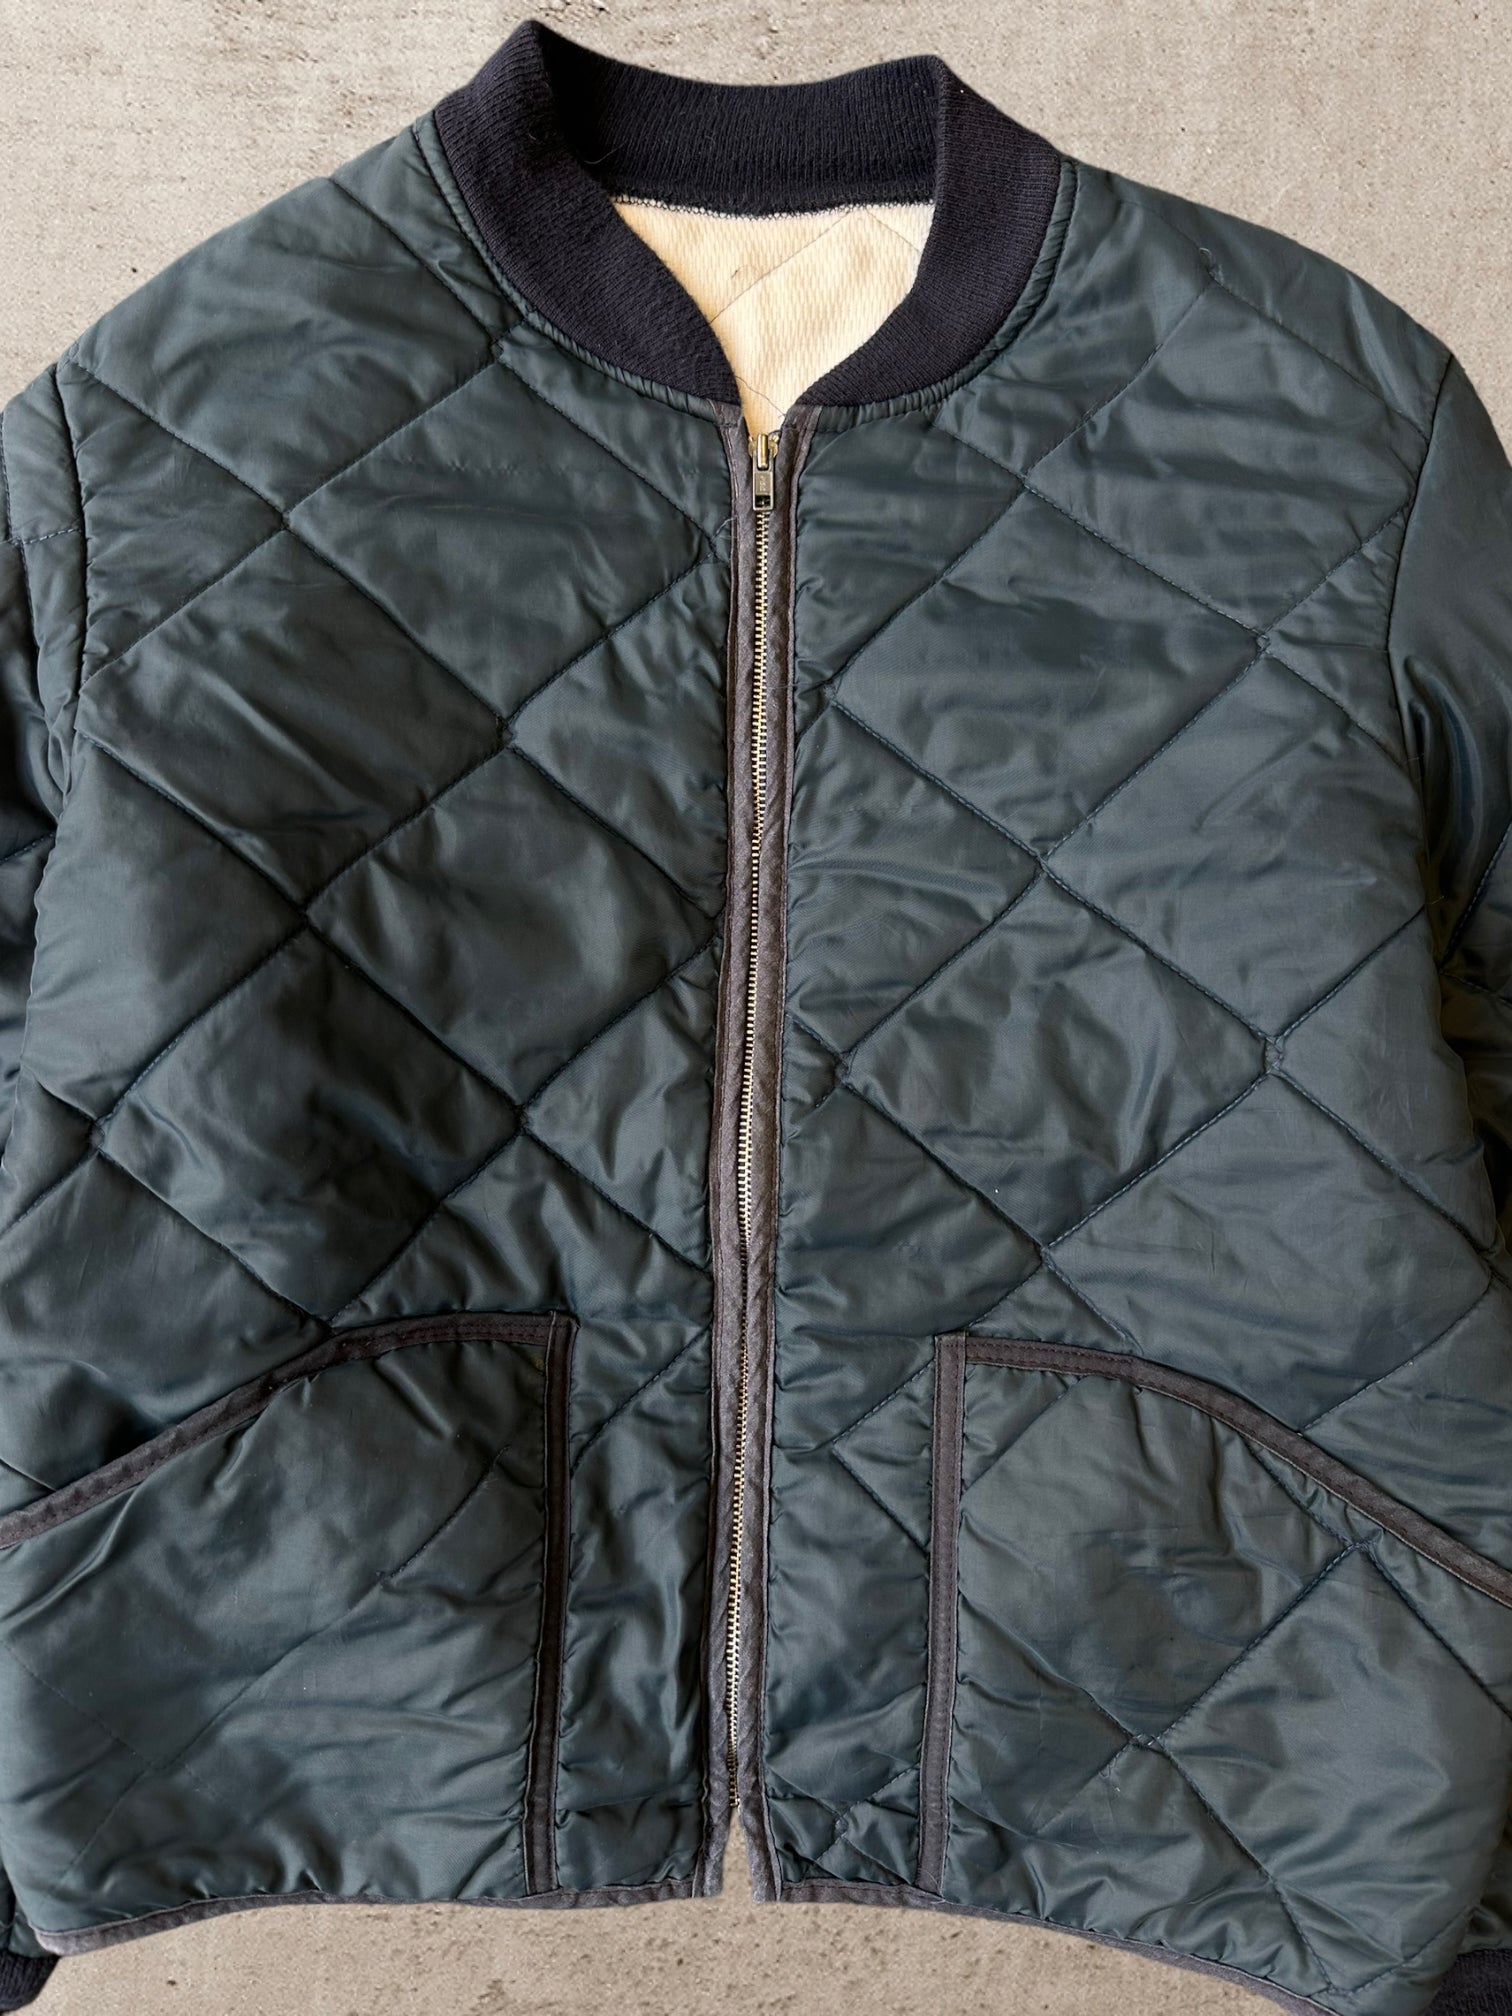 Vintage Thermal Lined Quilted Jacket - Large